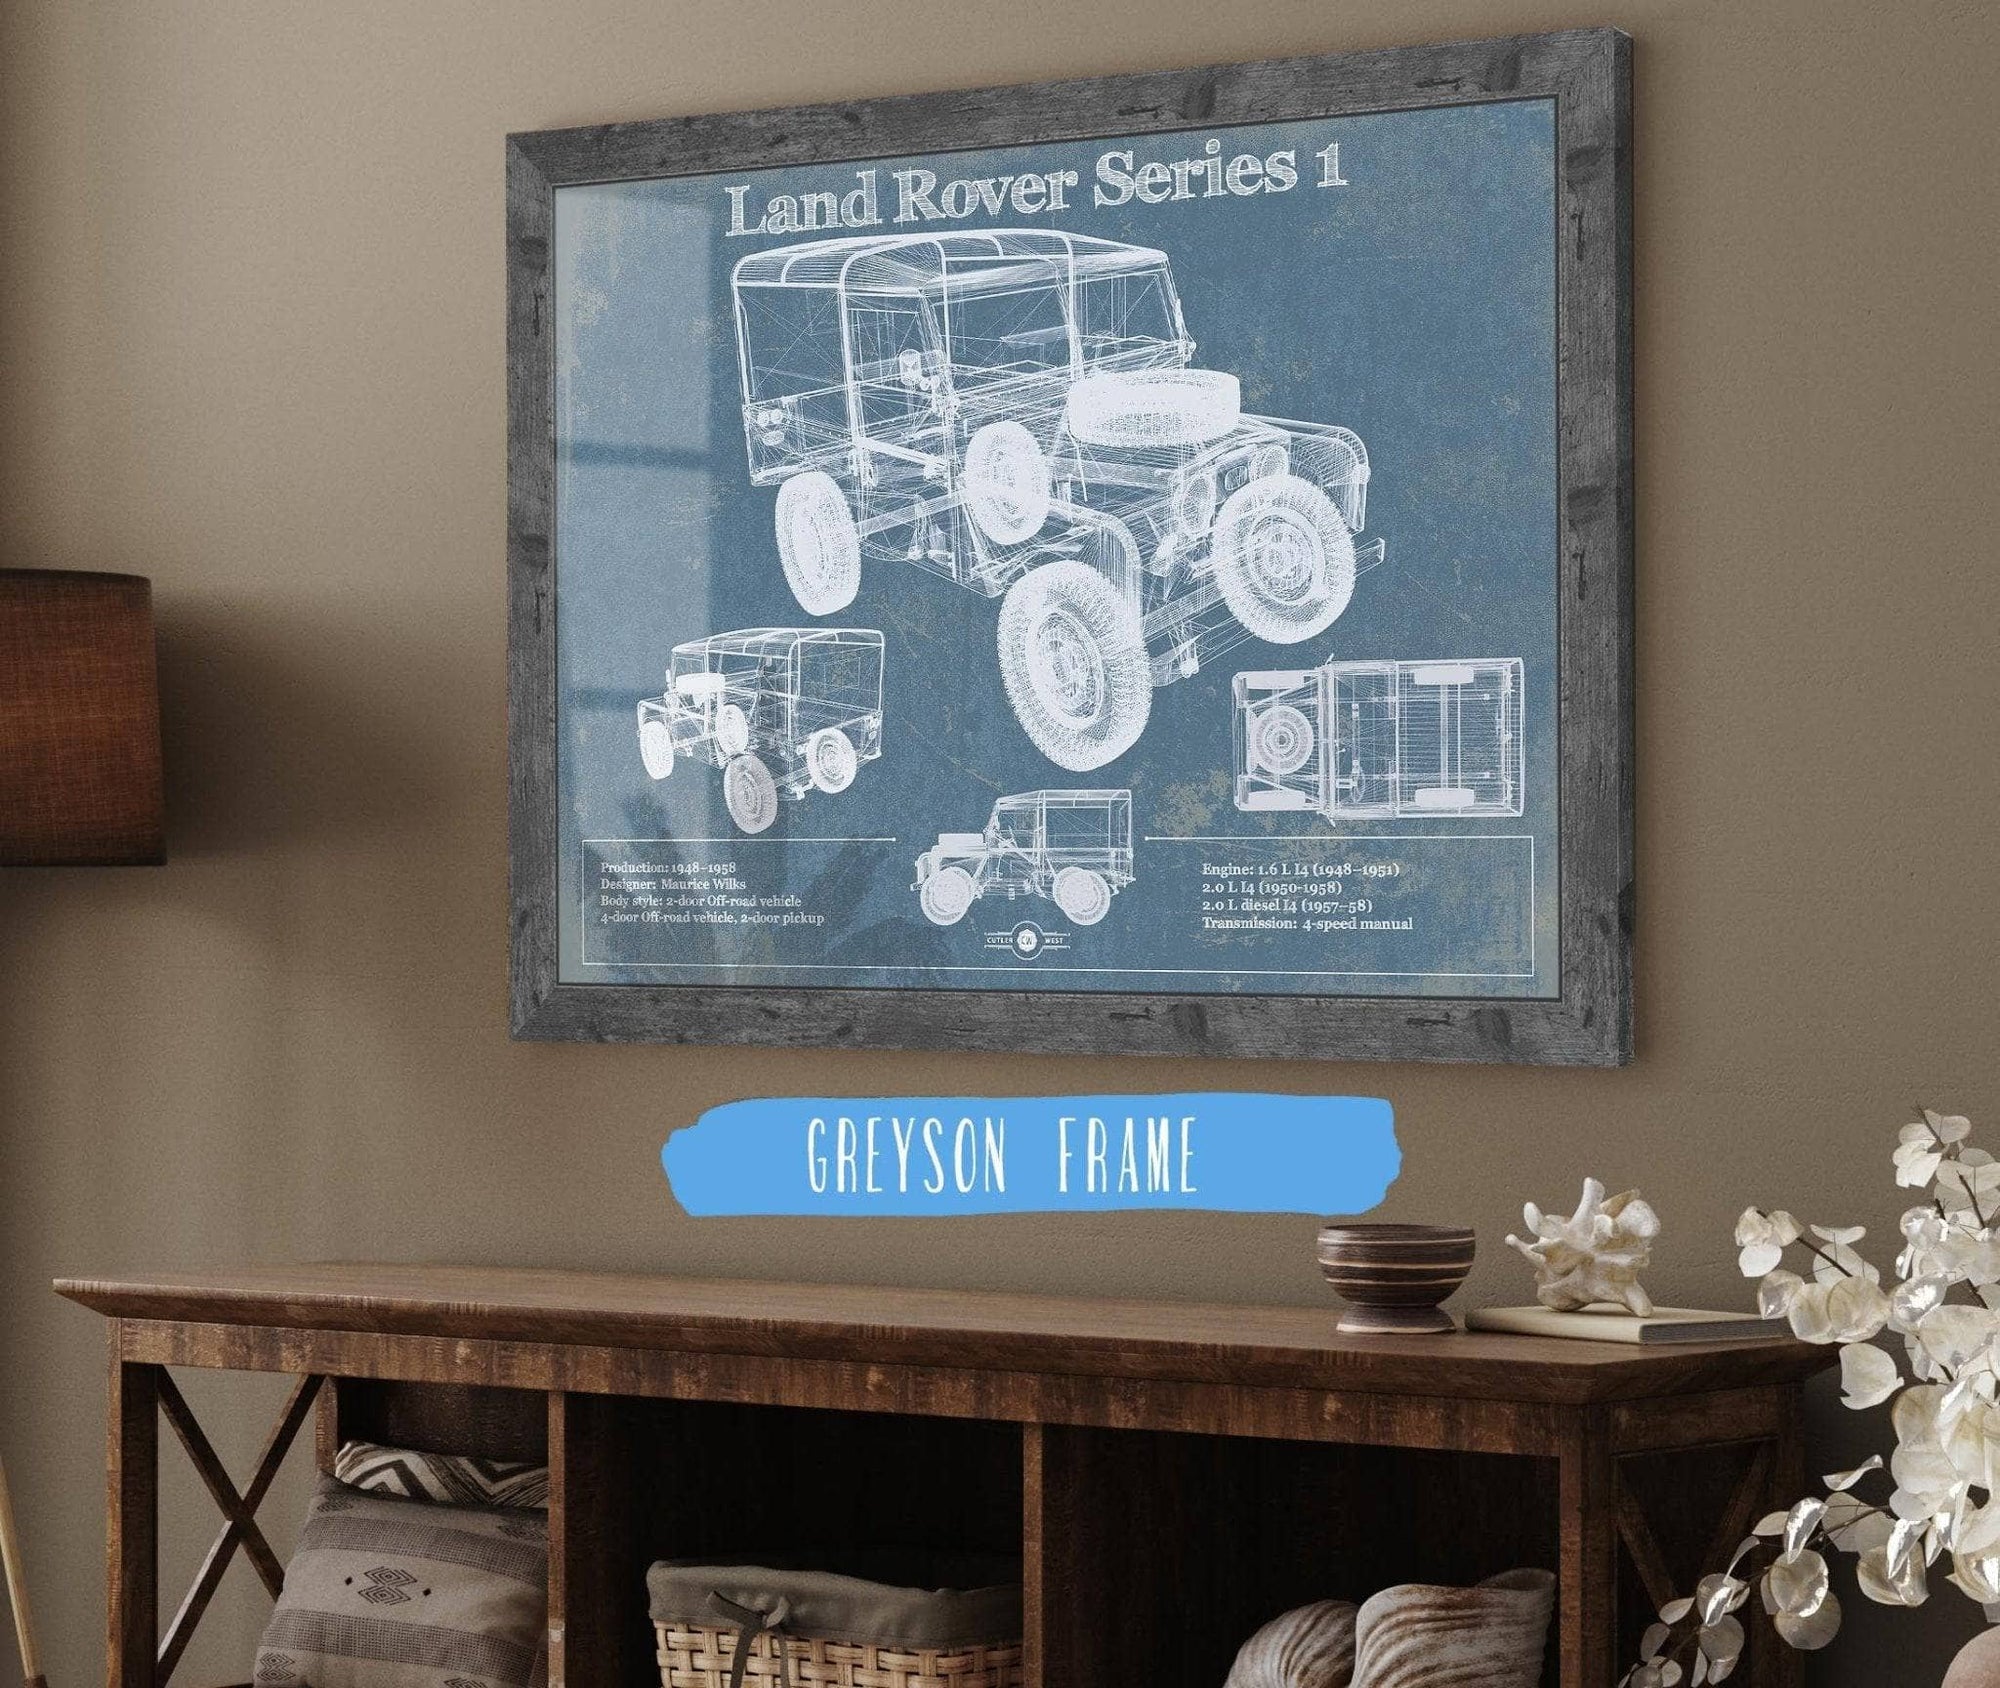 Cutler West Land Rover Collection 14" x 11" / Greyson Frame Land Rover Series 1 Blueprint Vintage Auto Patent Print 814256170_65573